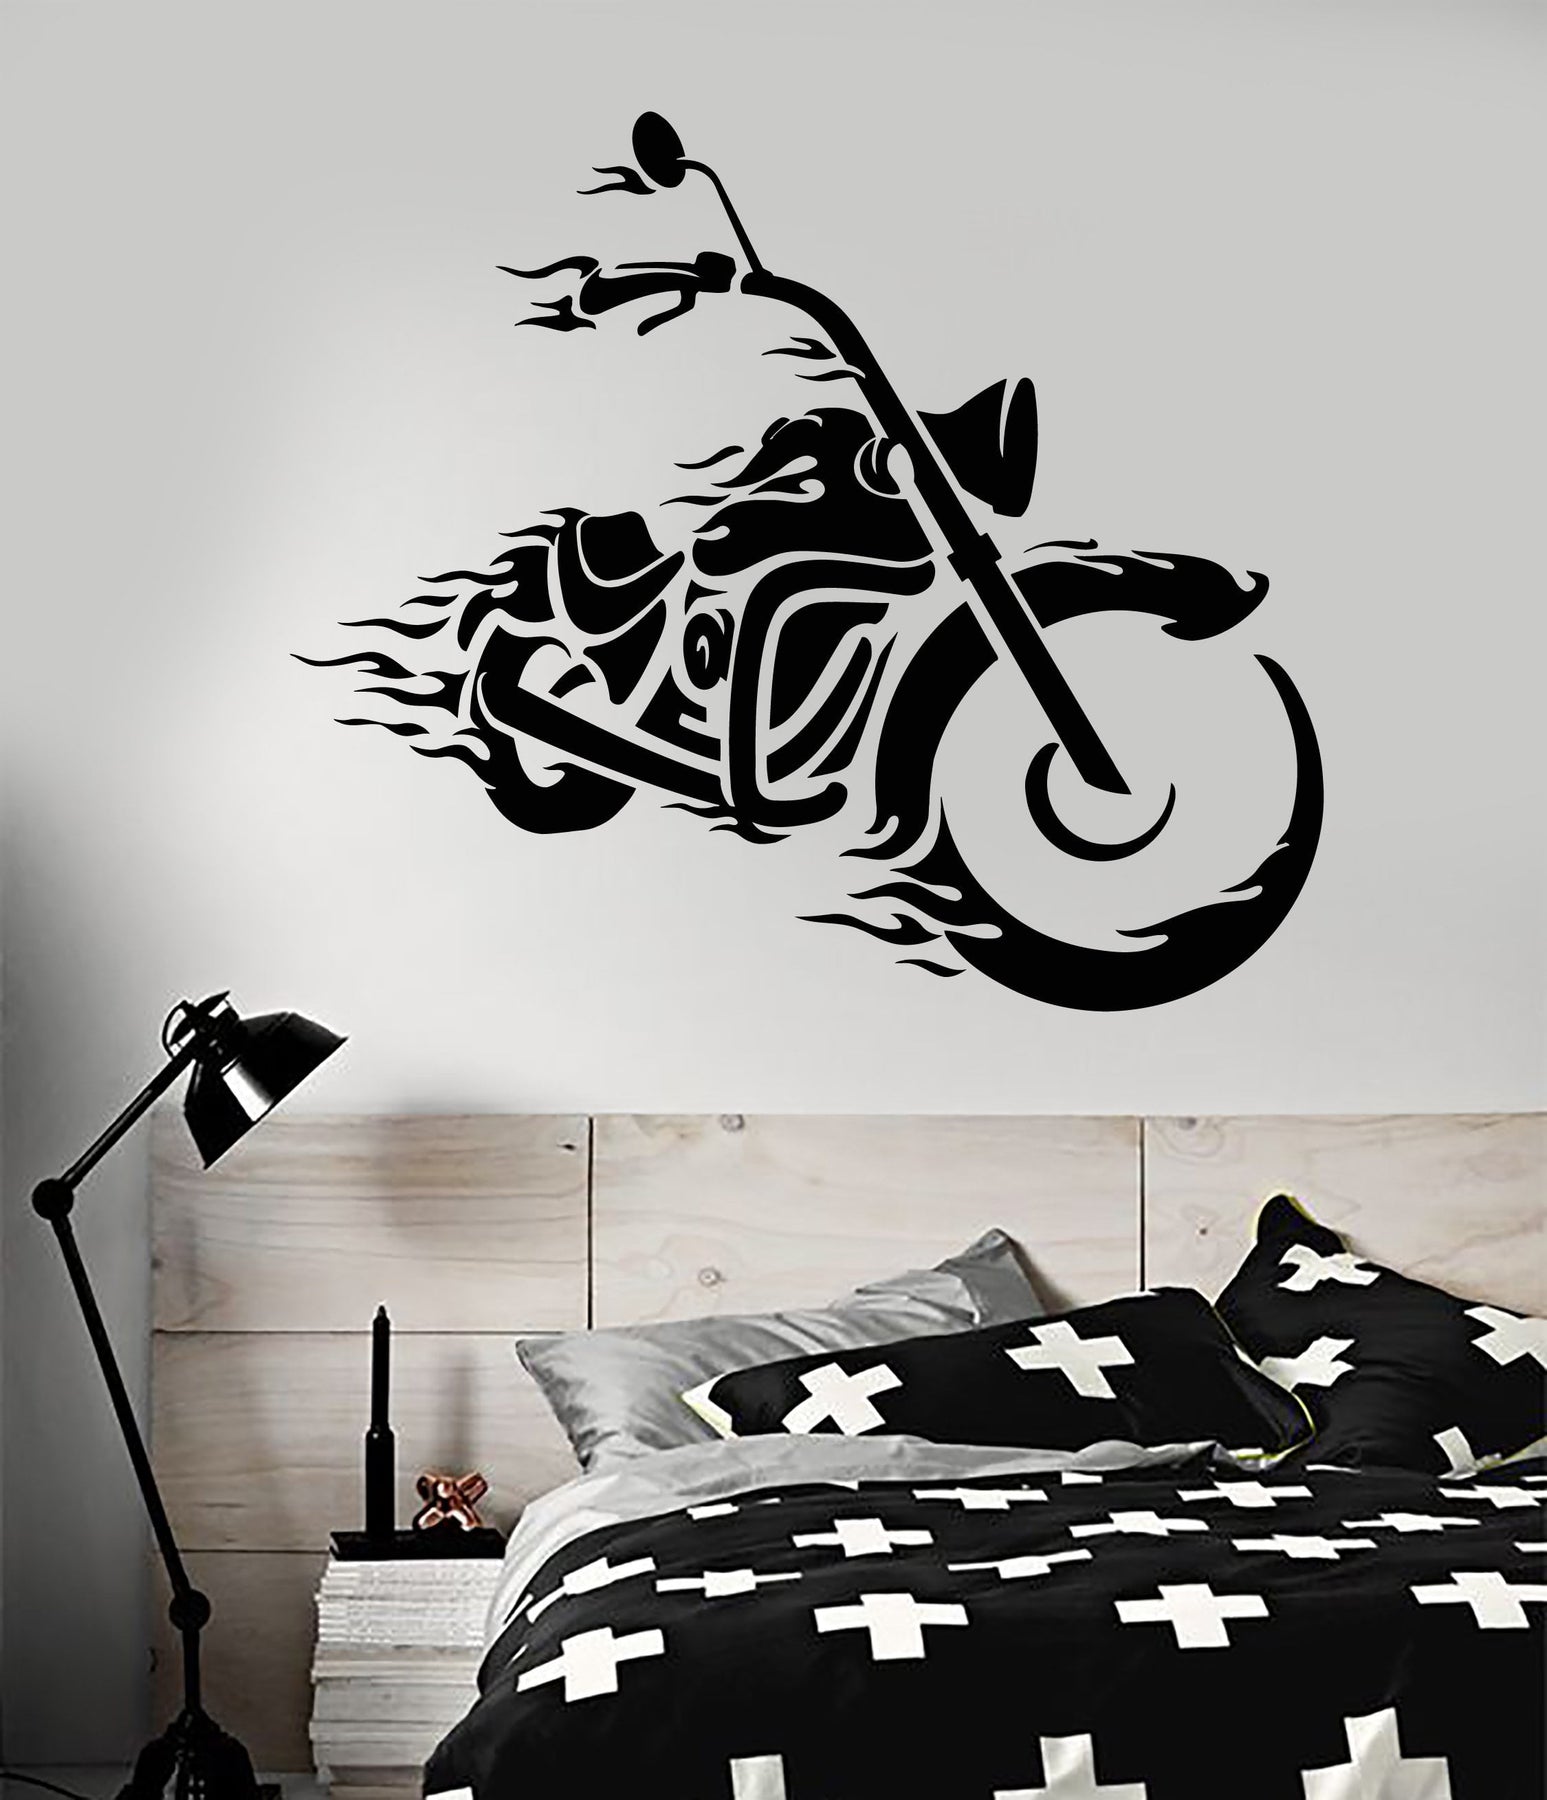 best stickers for motorbikes